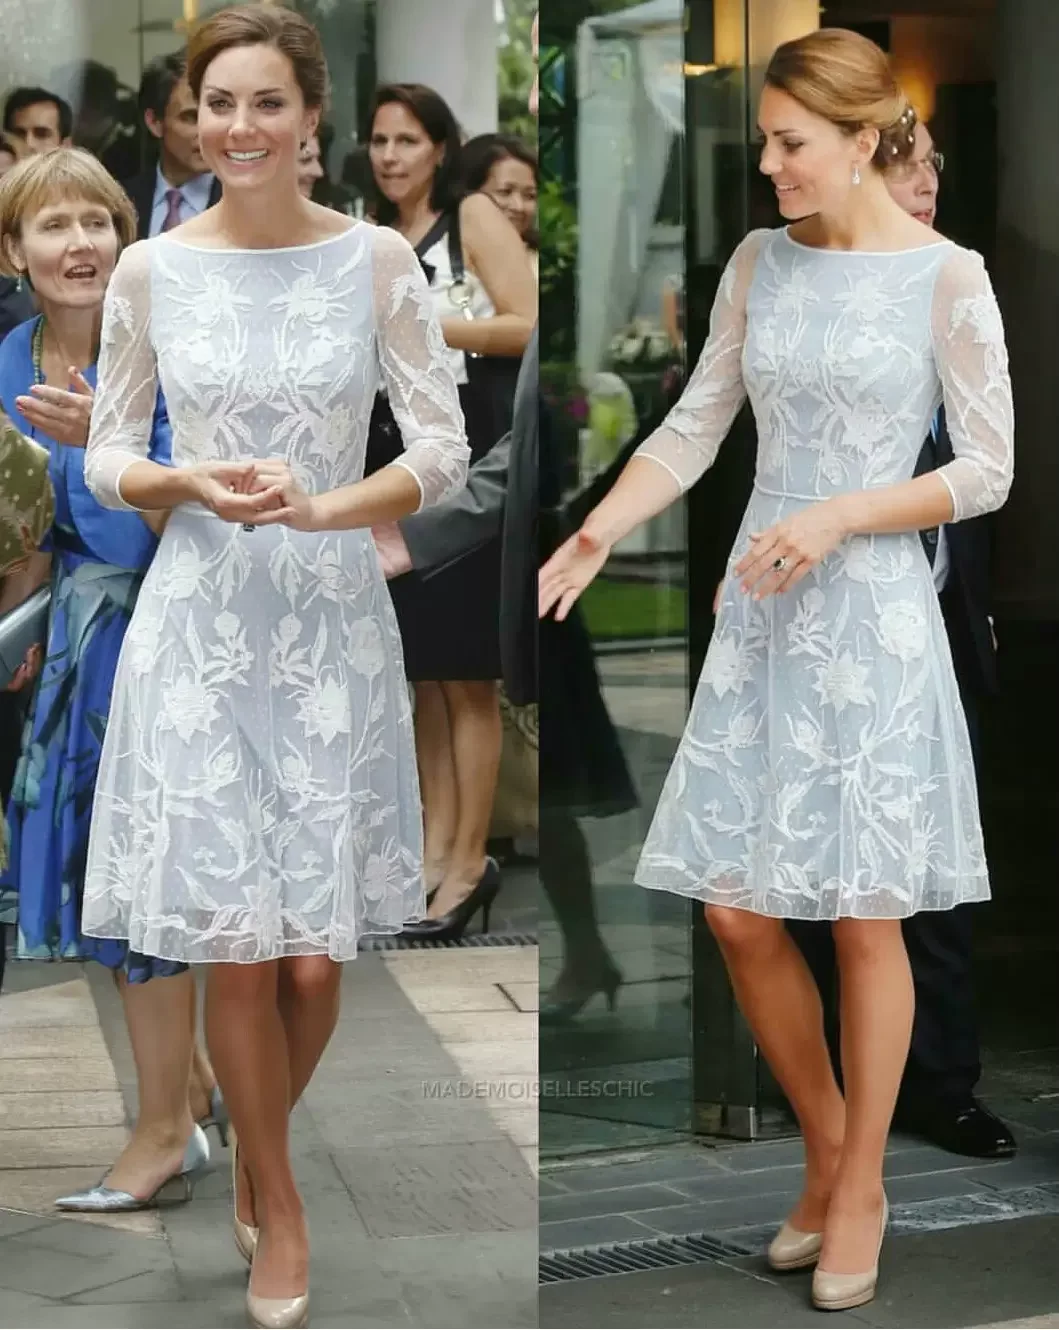 

Floral Evening Dresses Of Princess Kate Full Appliqued Lace Elegant Prom Dress Jewel Long Sleeve Knee-length Party Gown Cheap